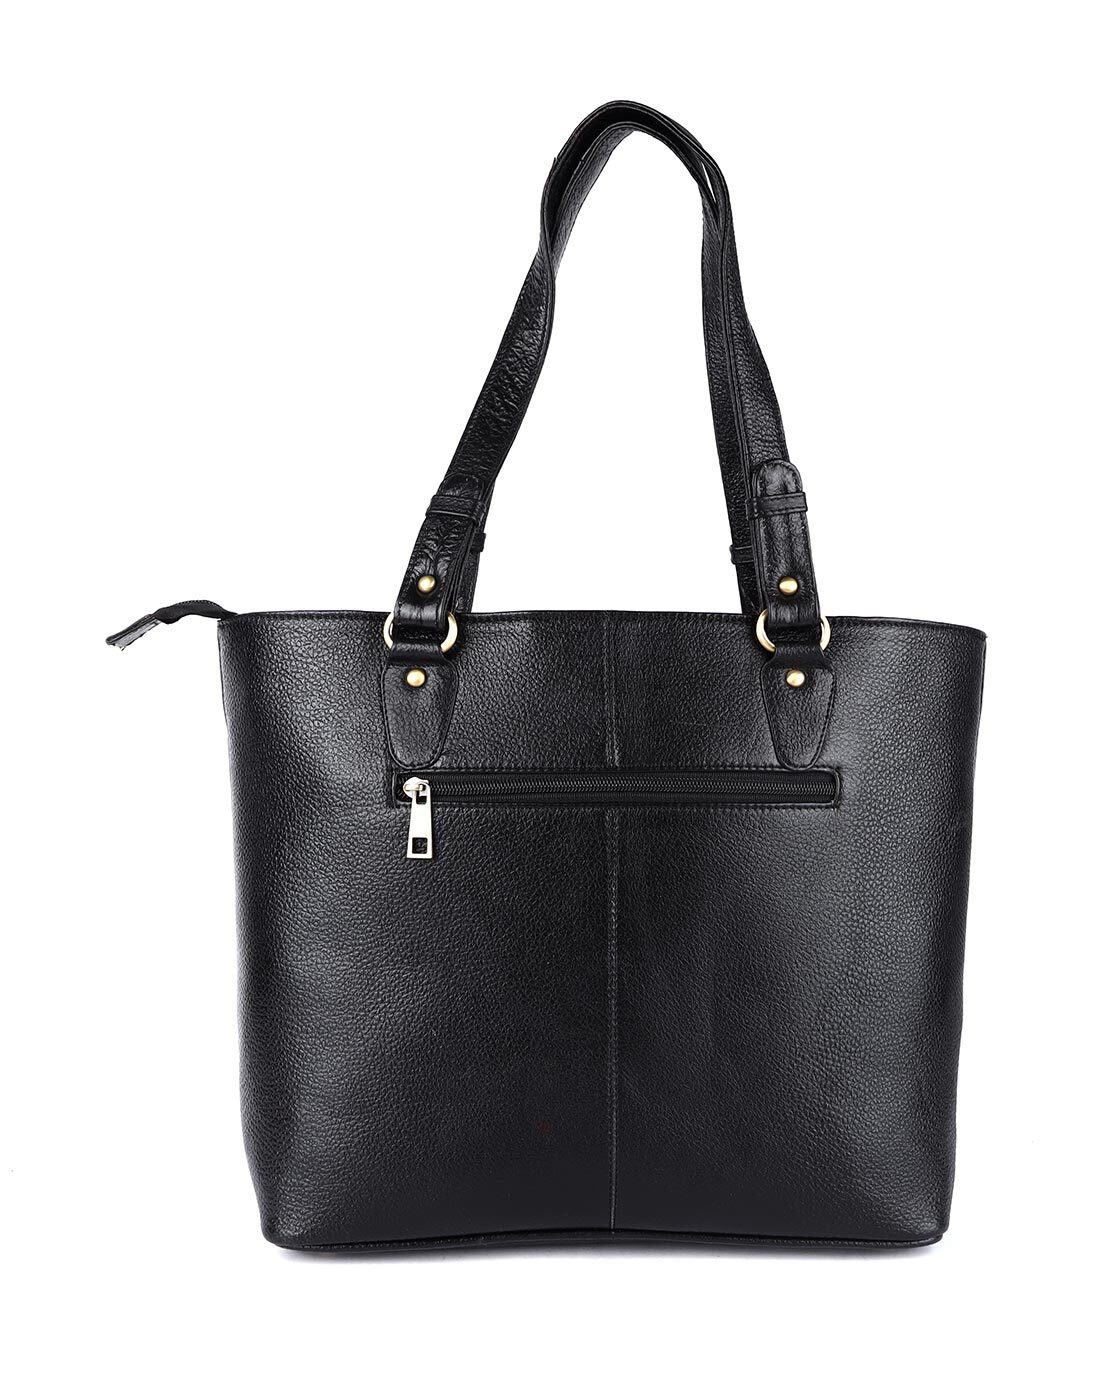 Small Harmony Black Leather Tote: Purse that Charges Phone | Everpurse